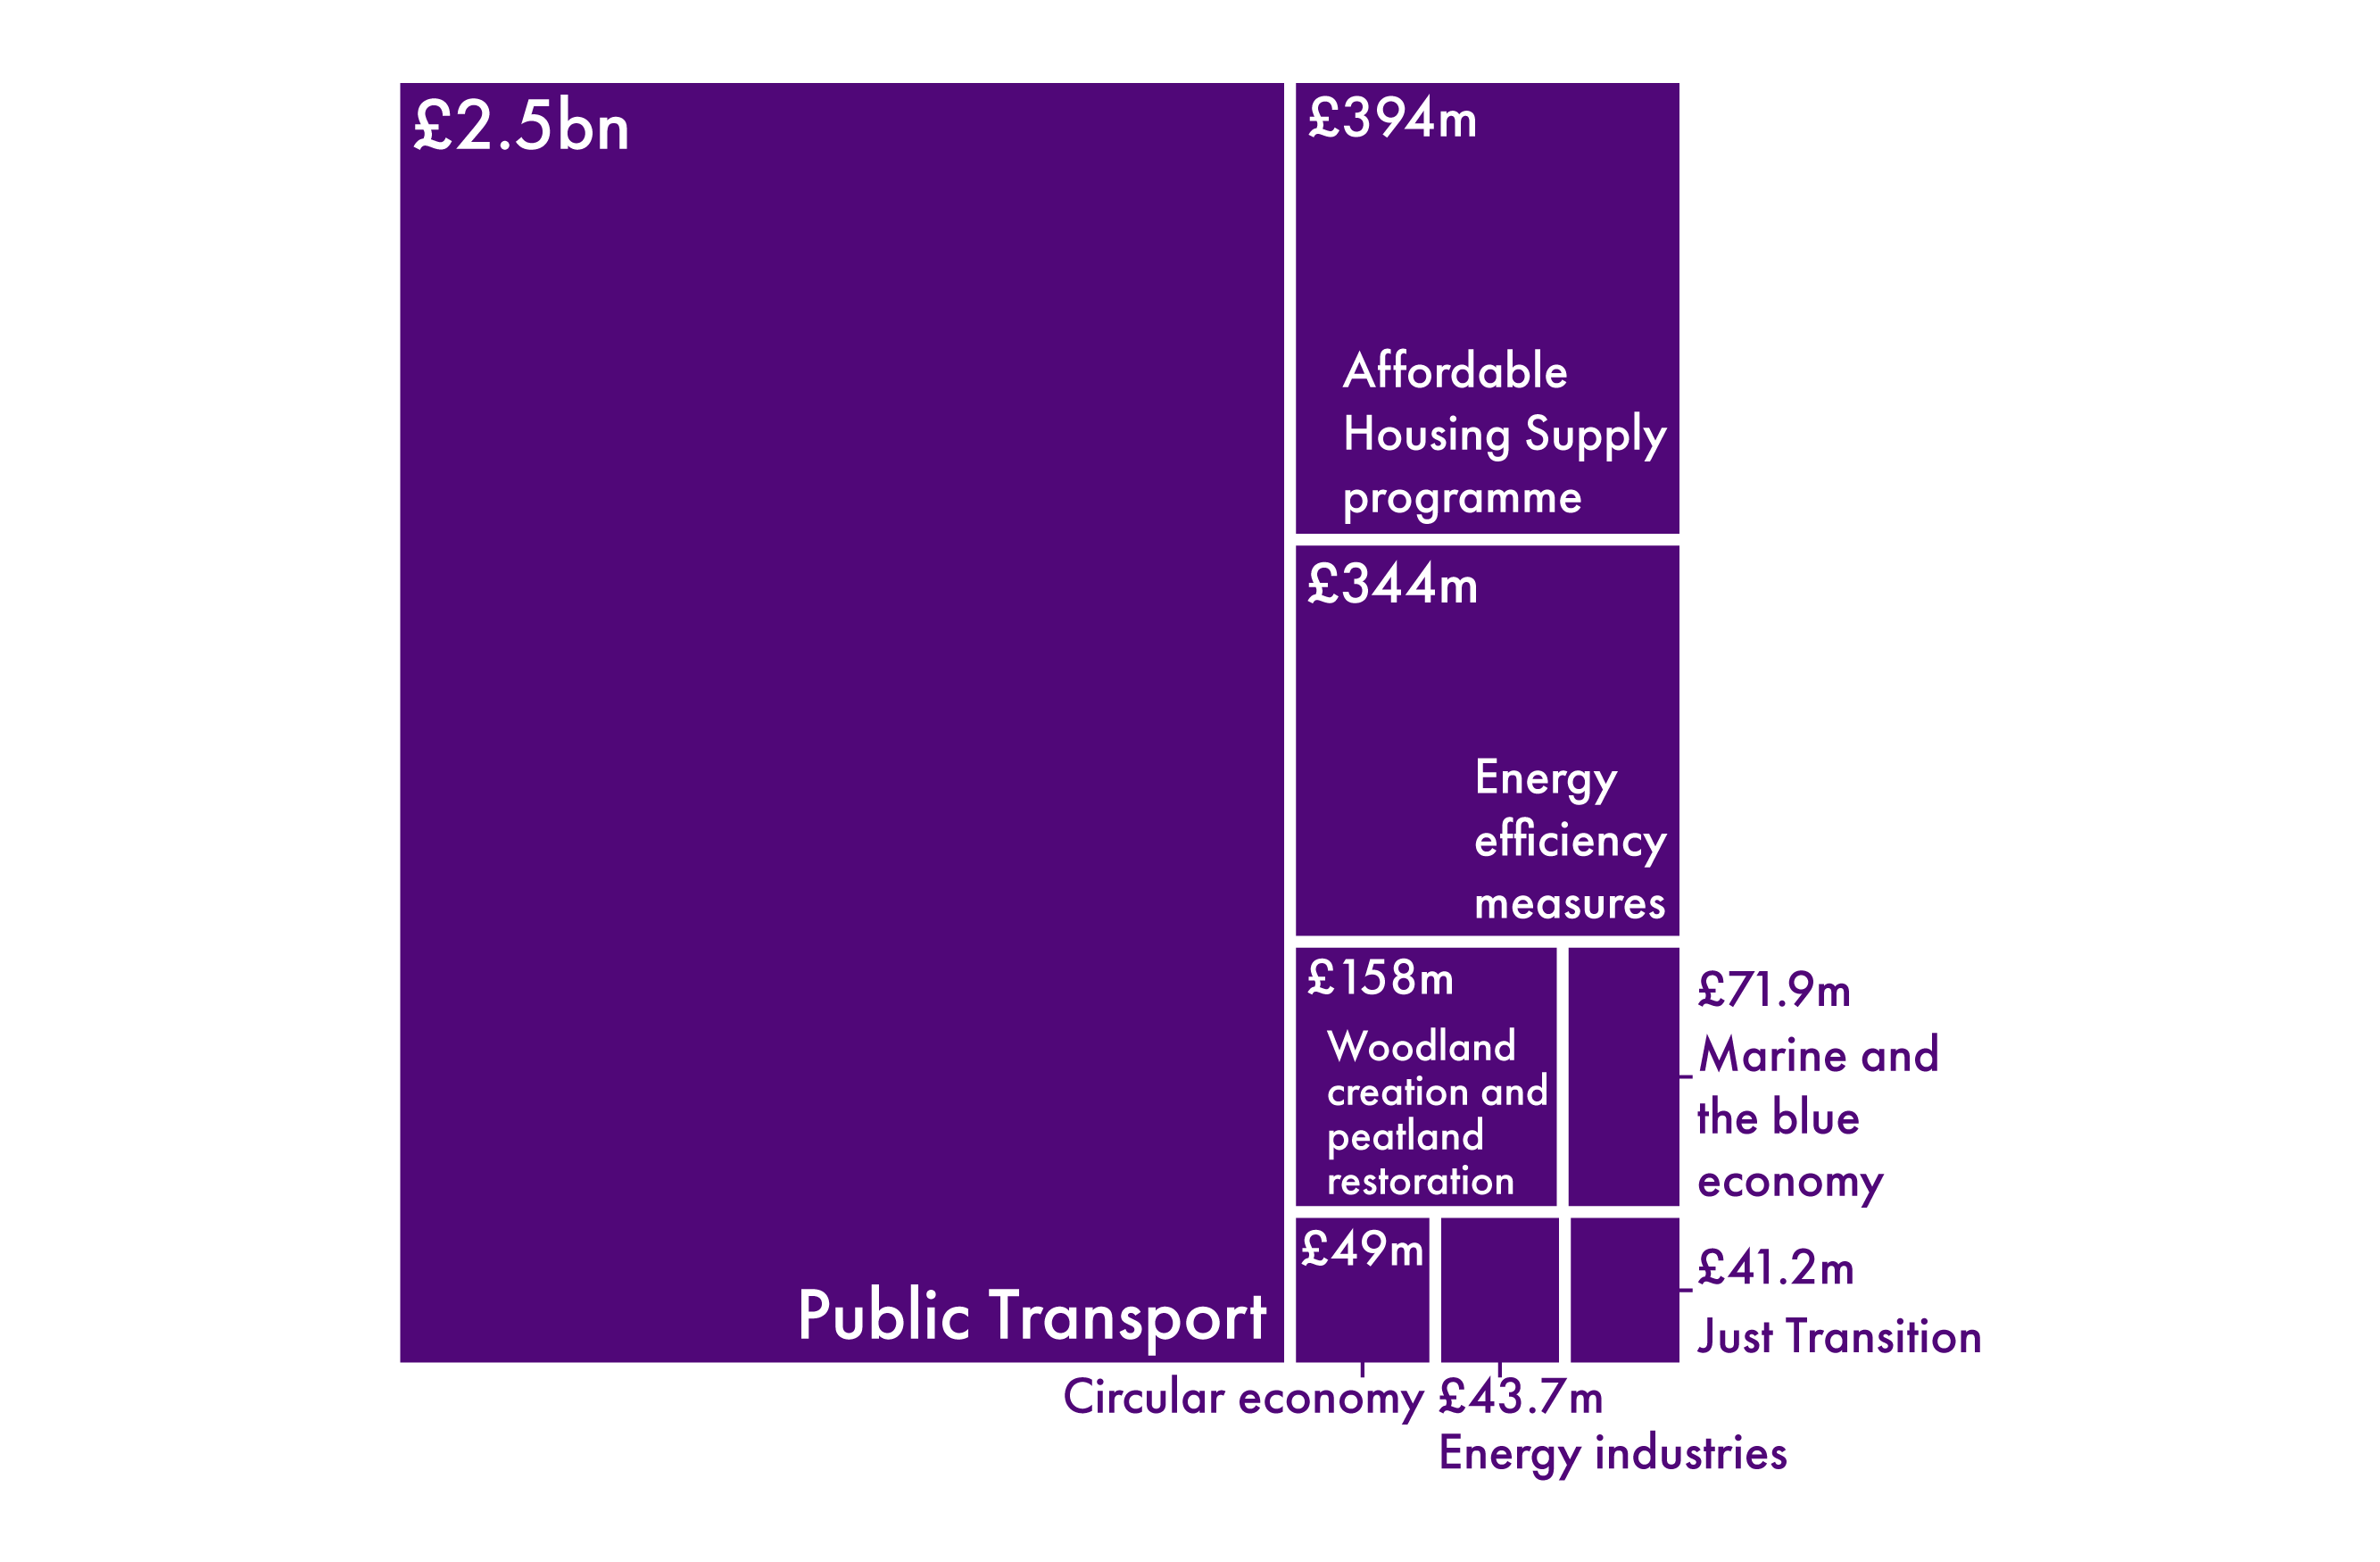 The Scottish Government state that £4.7 billion in capital and resource funding in the 2024-25 Budget will contribute to meeting Scotland's climate goals. Of this, £2.5 billion represents the ongoing investment in public transport, £394 million is the affordable housing supply programme and £344 million is planned spending for energy efficiency.